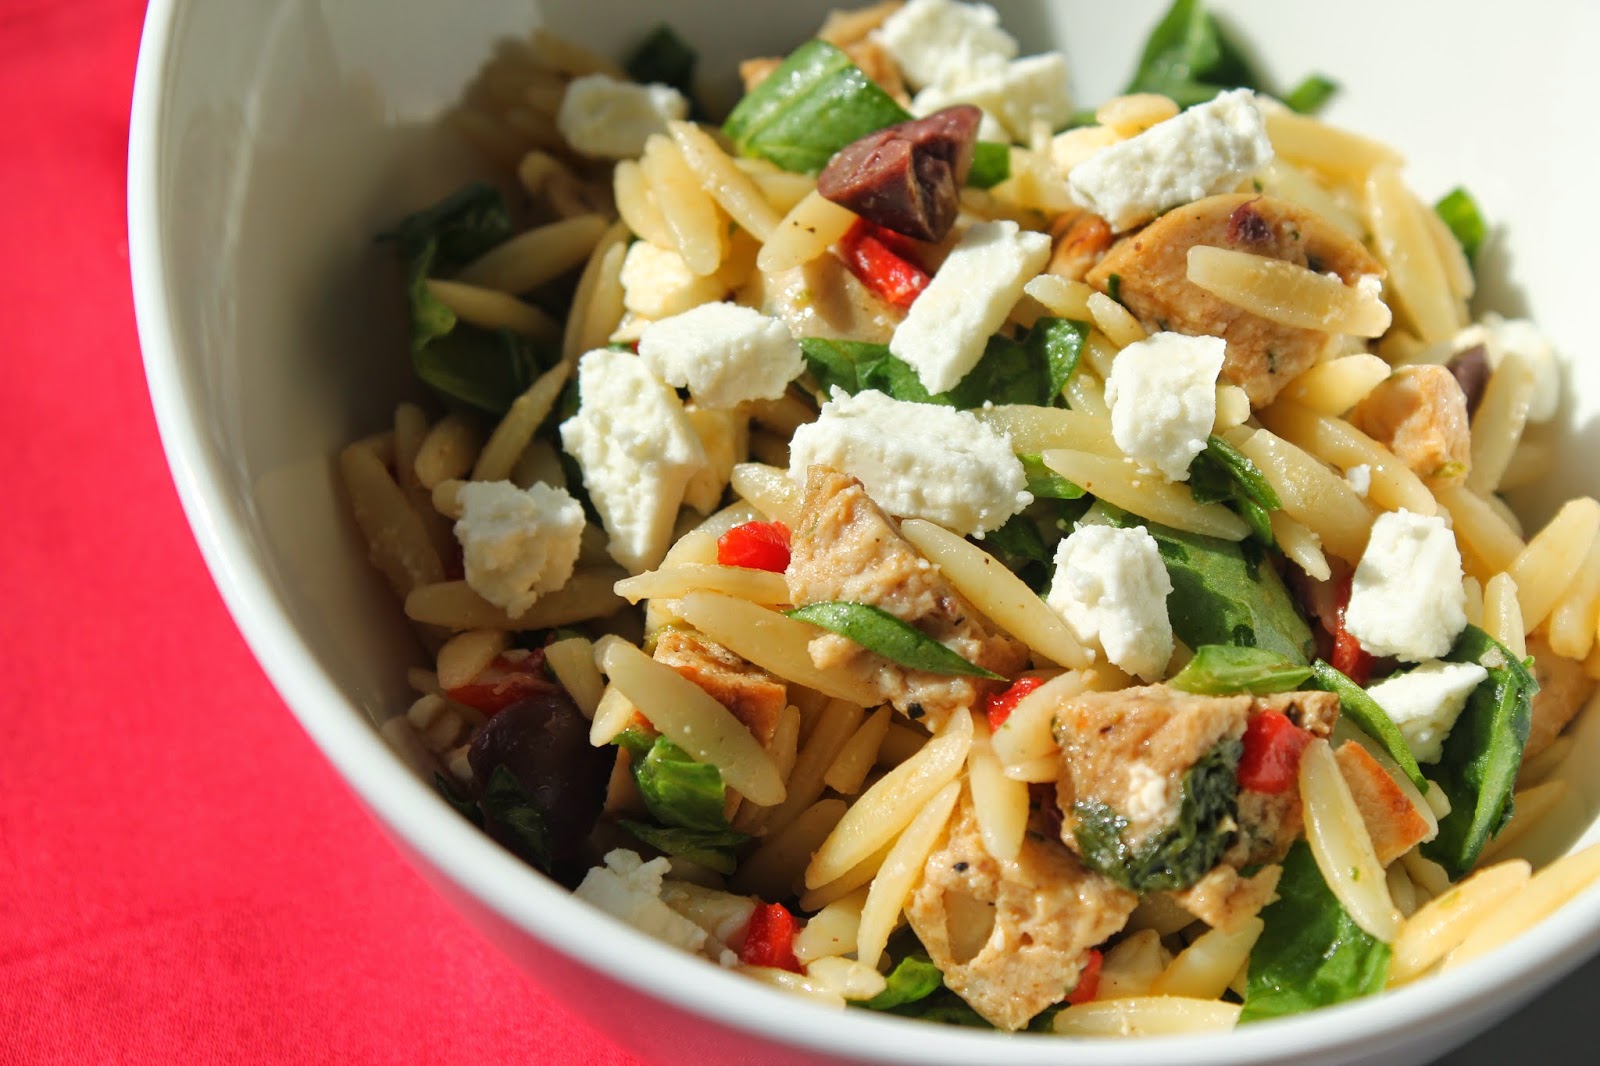 Orzo salad with chicken sausage, spinach, and feta